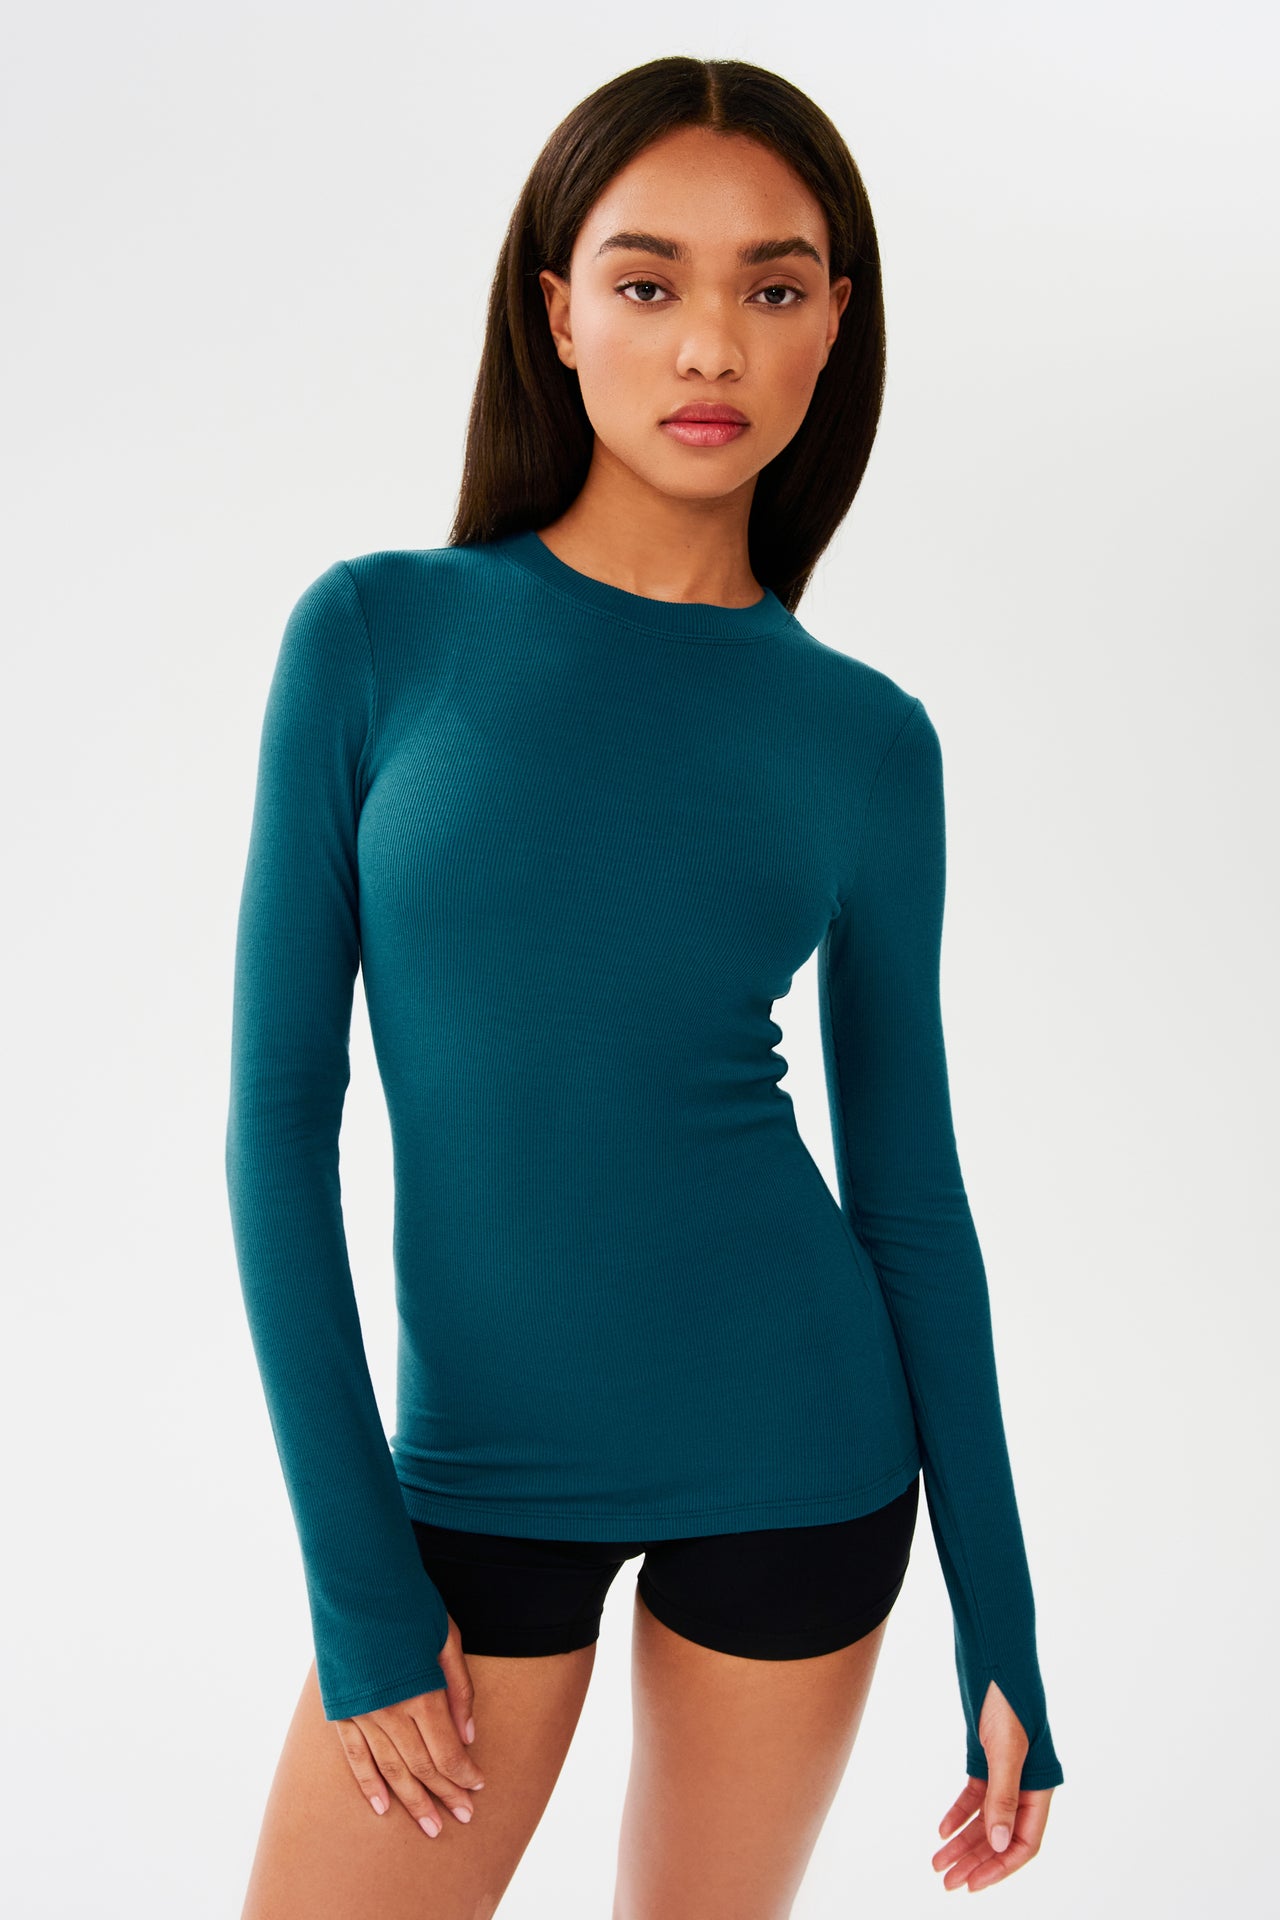 The model is wearing a Louise Rib Long Sleeve - Peacock top made of modal and spandex from SPLITS59.